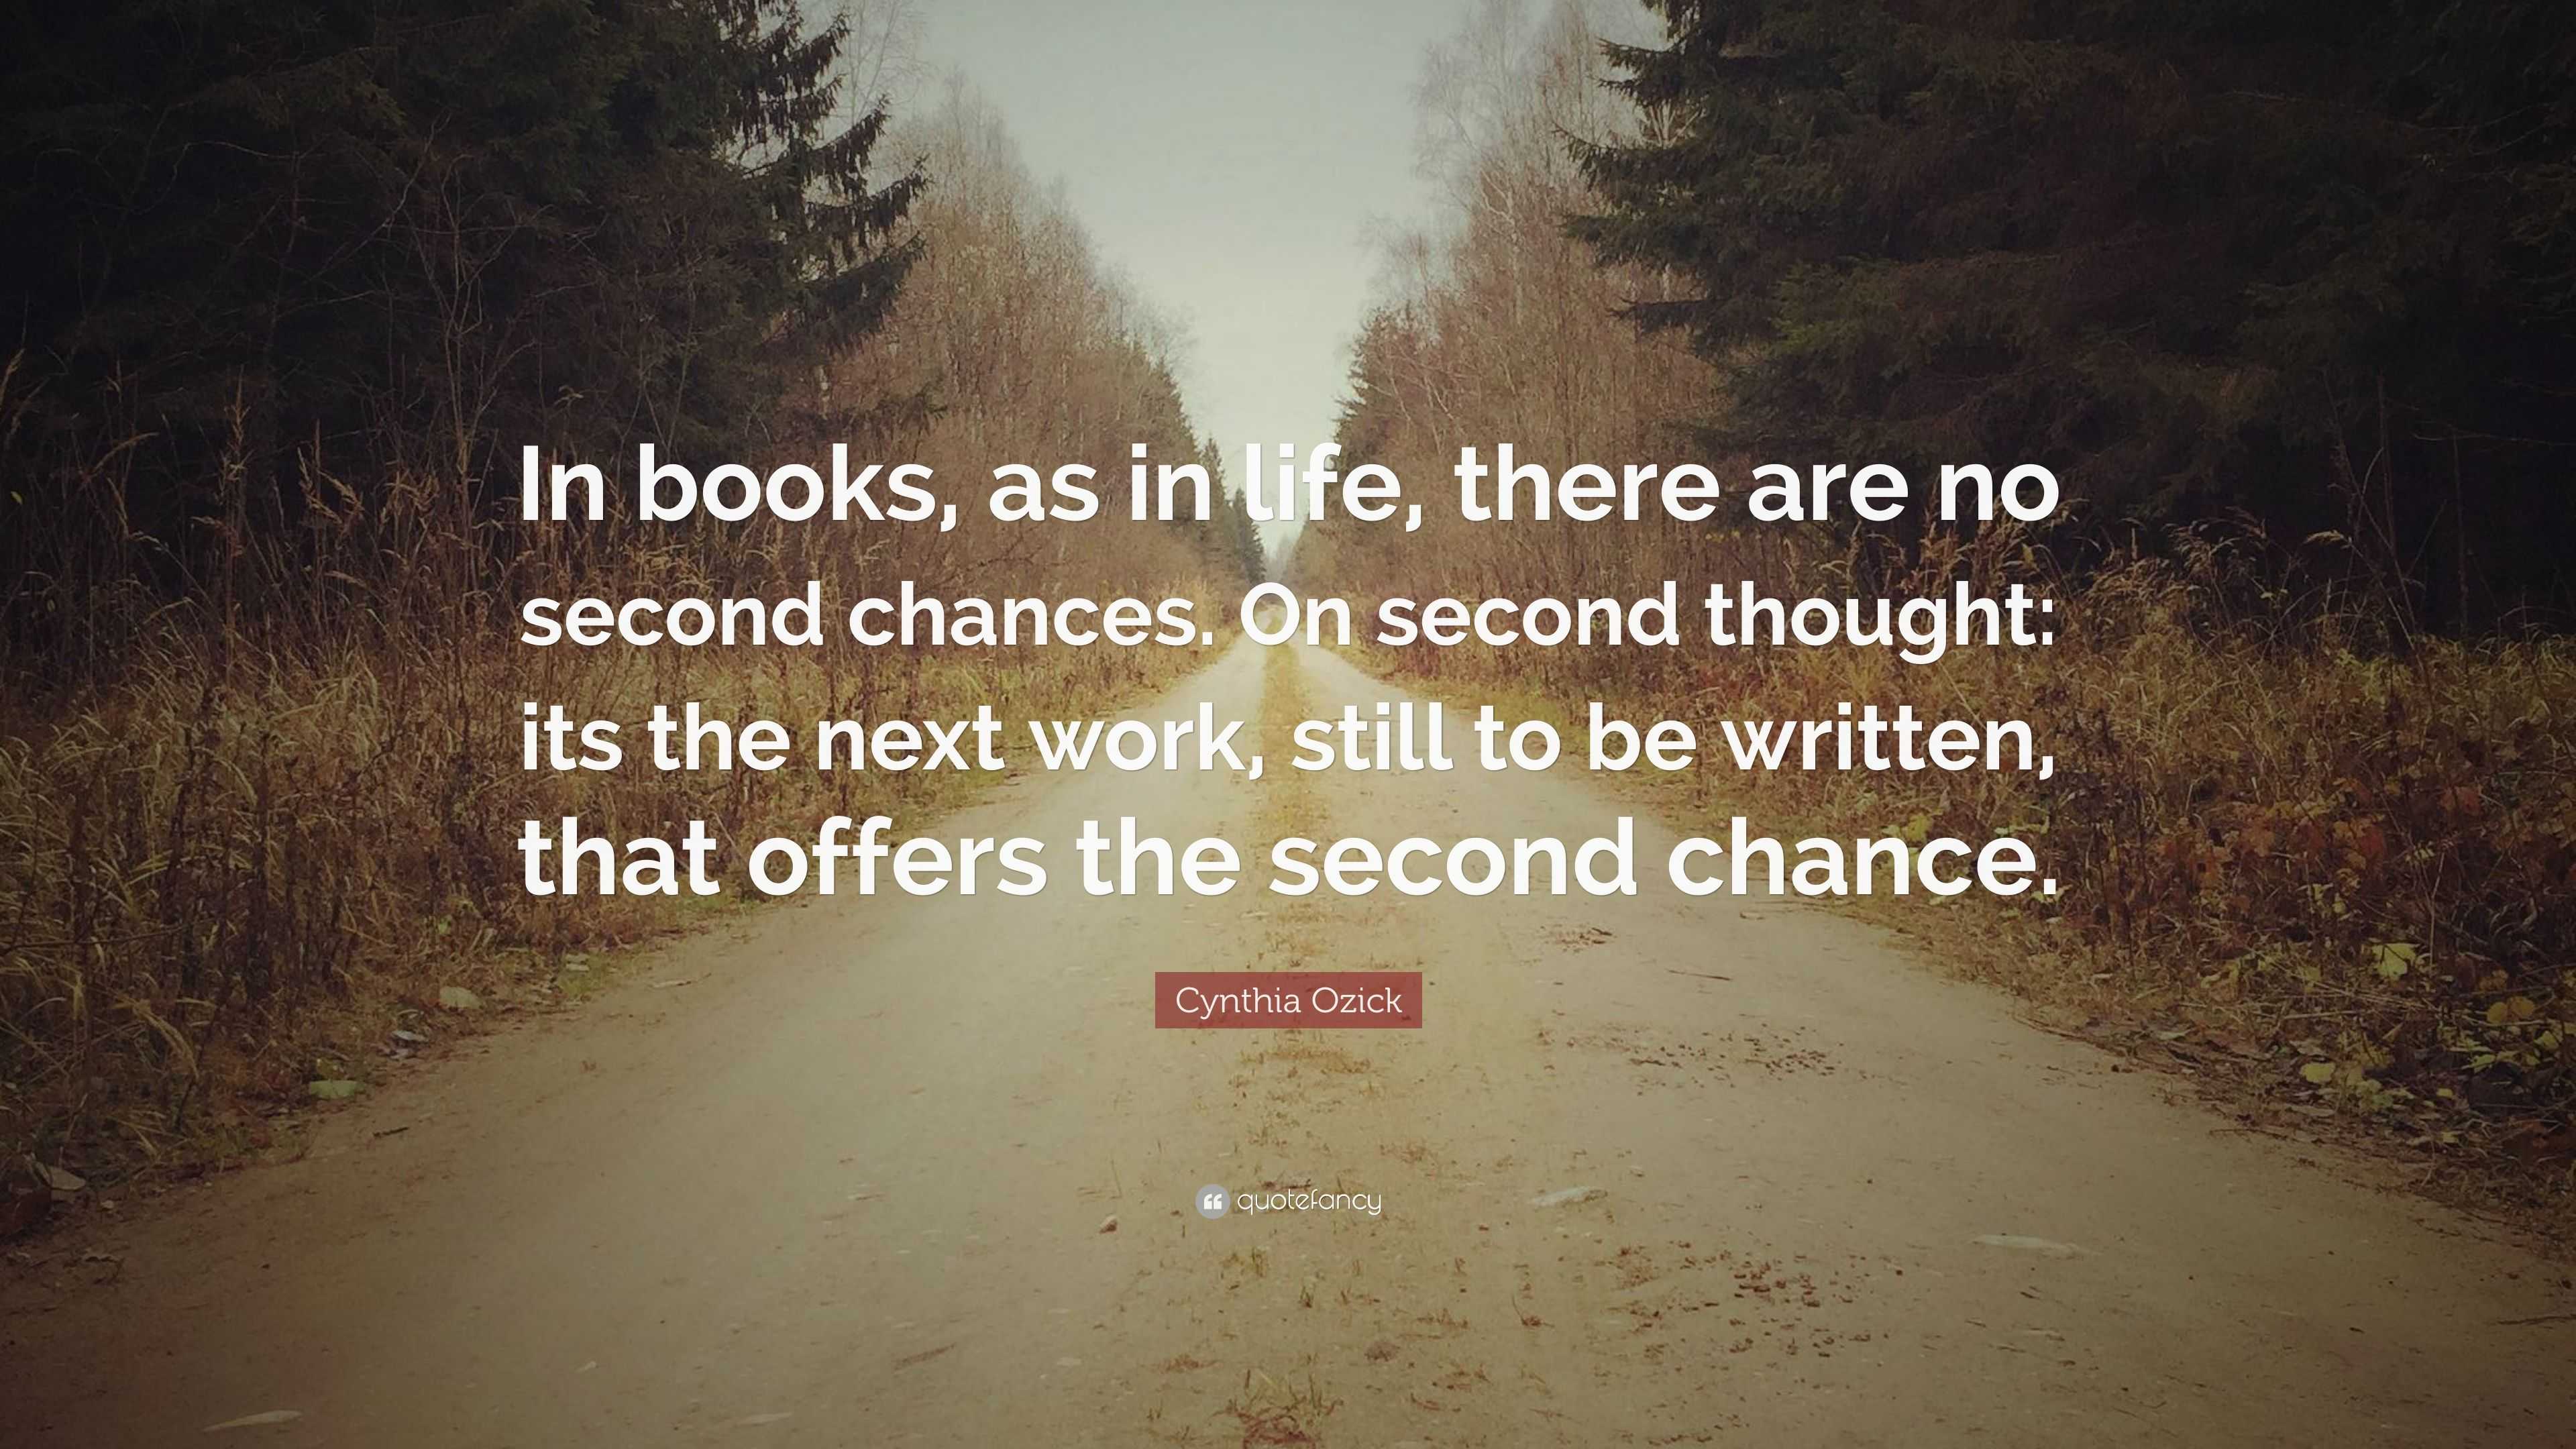 Cynthia Ozick Quote: “In books, as in life, there are no second chances ...